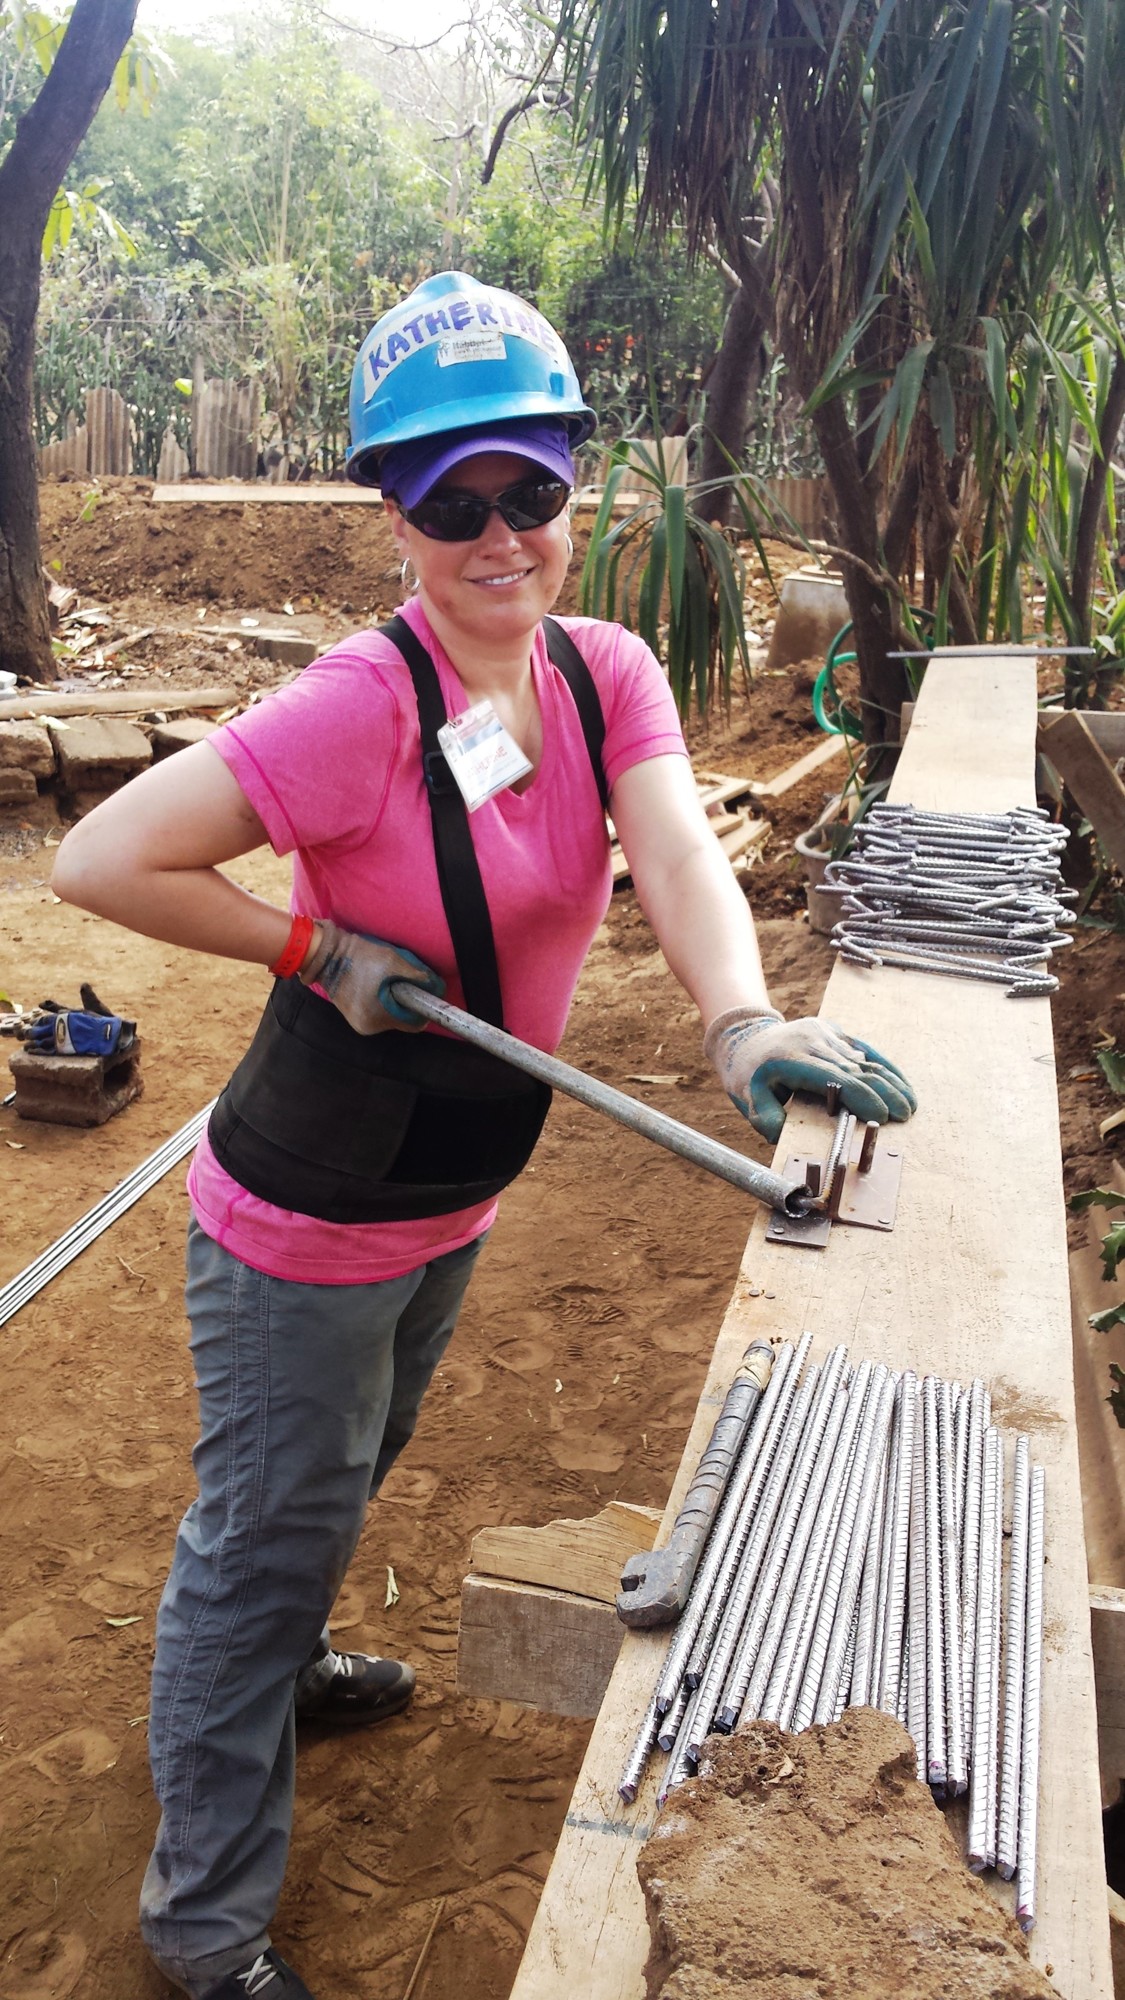 Katherine Kyle and coworkers had to cut and bend rebar when building a Habitat for Humanity house in Nicaragua.